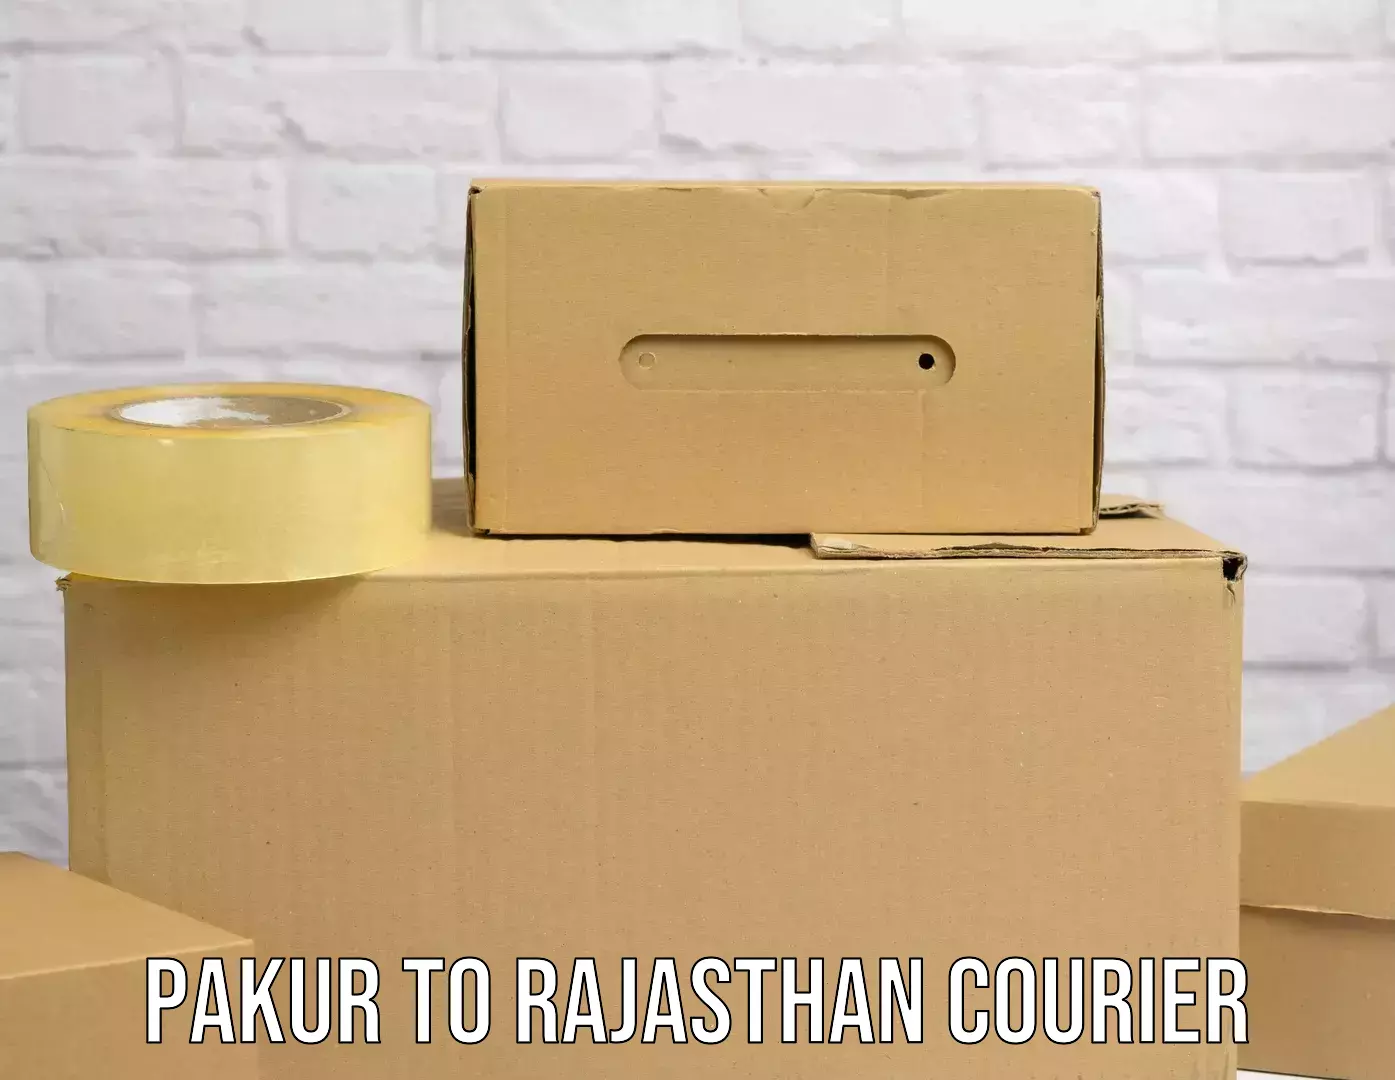 High-priority parcel service Pakur to Piparcity